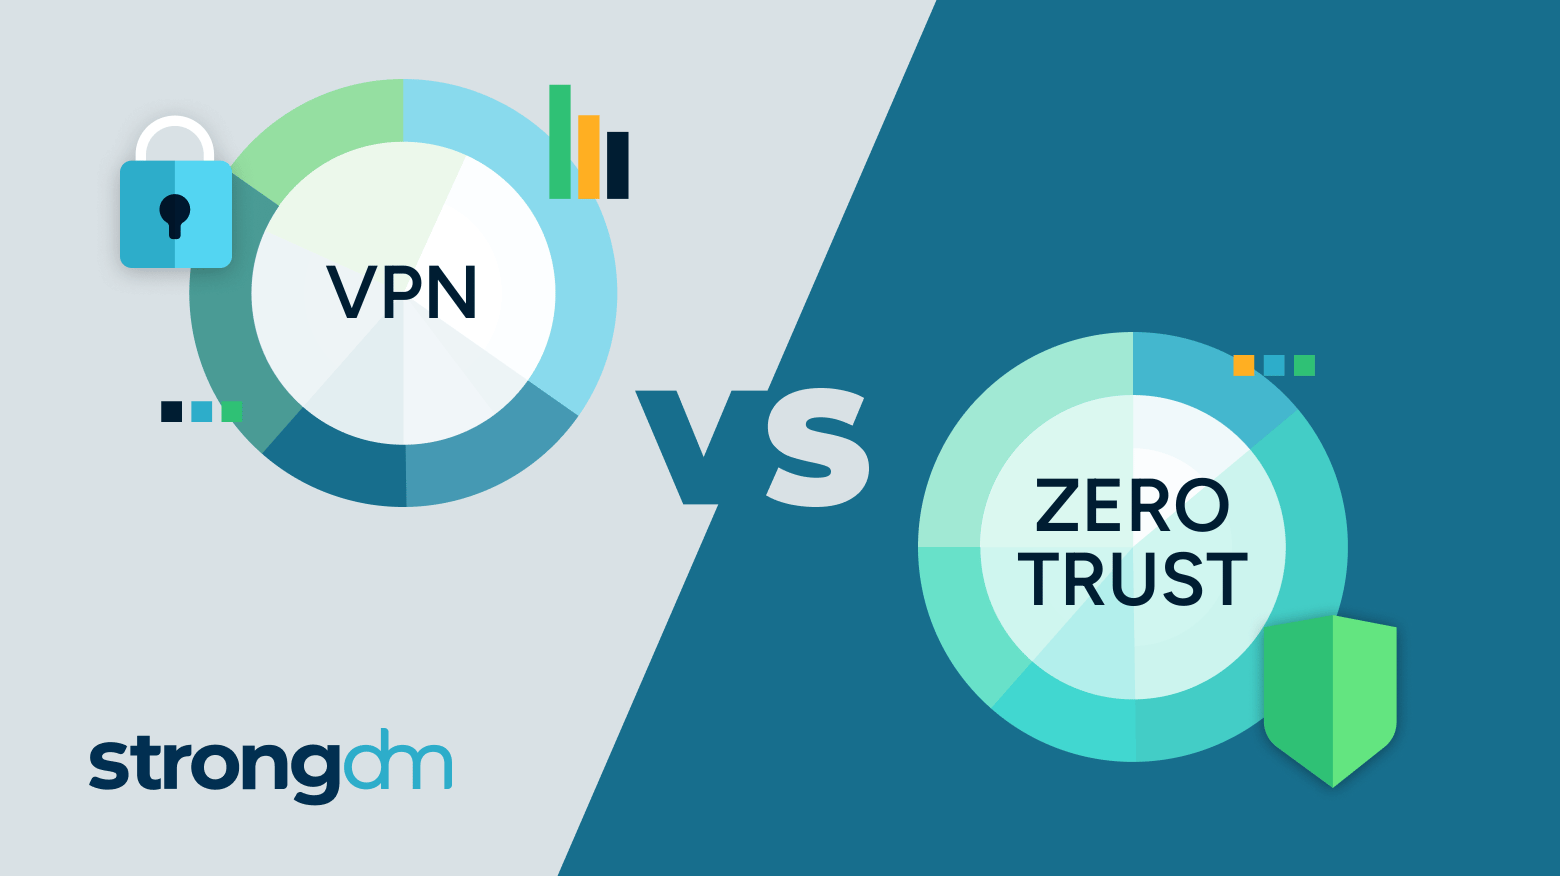 Zero Trust vs. VPN: What Solution Is Right for You?